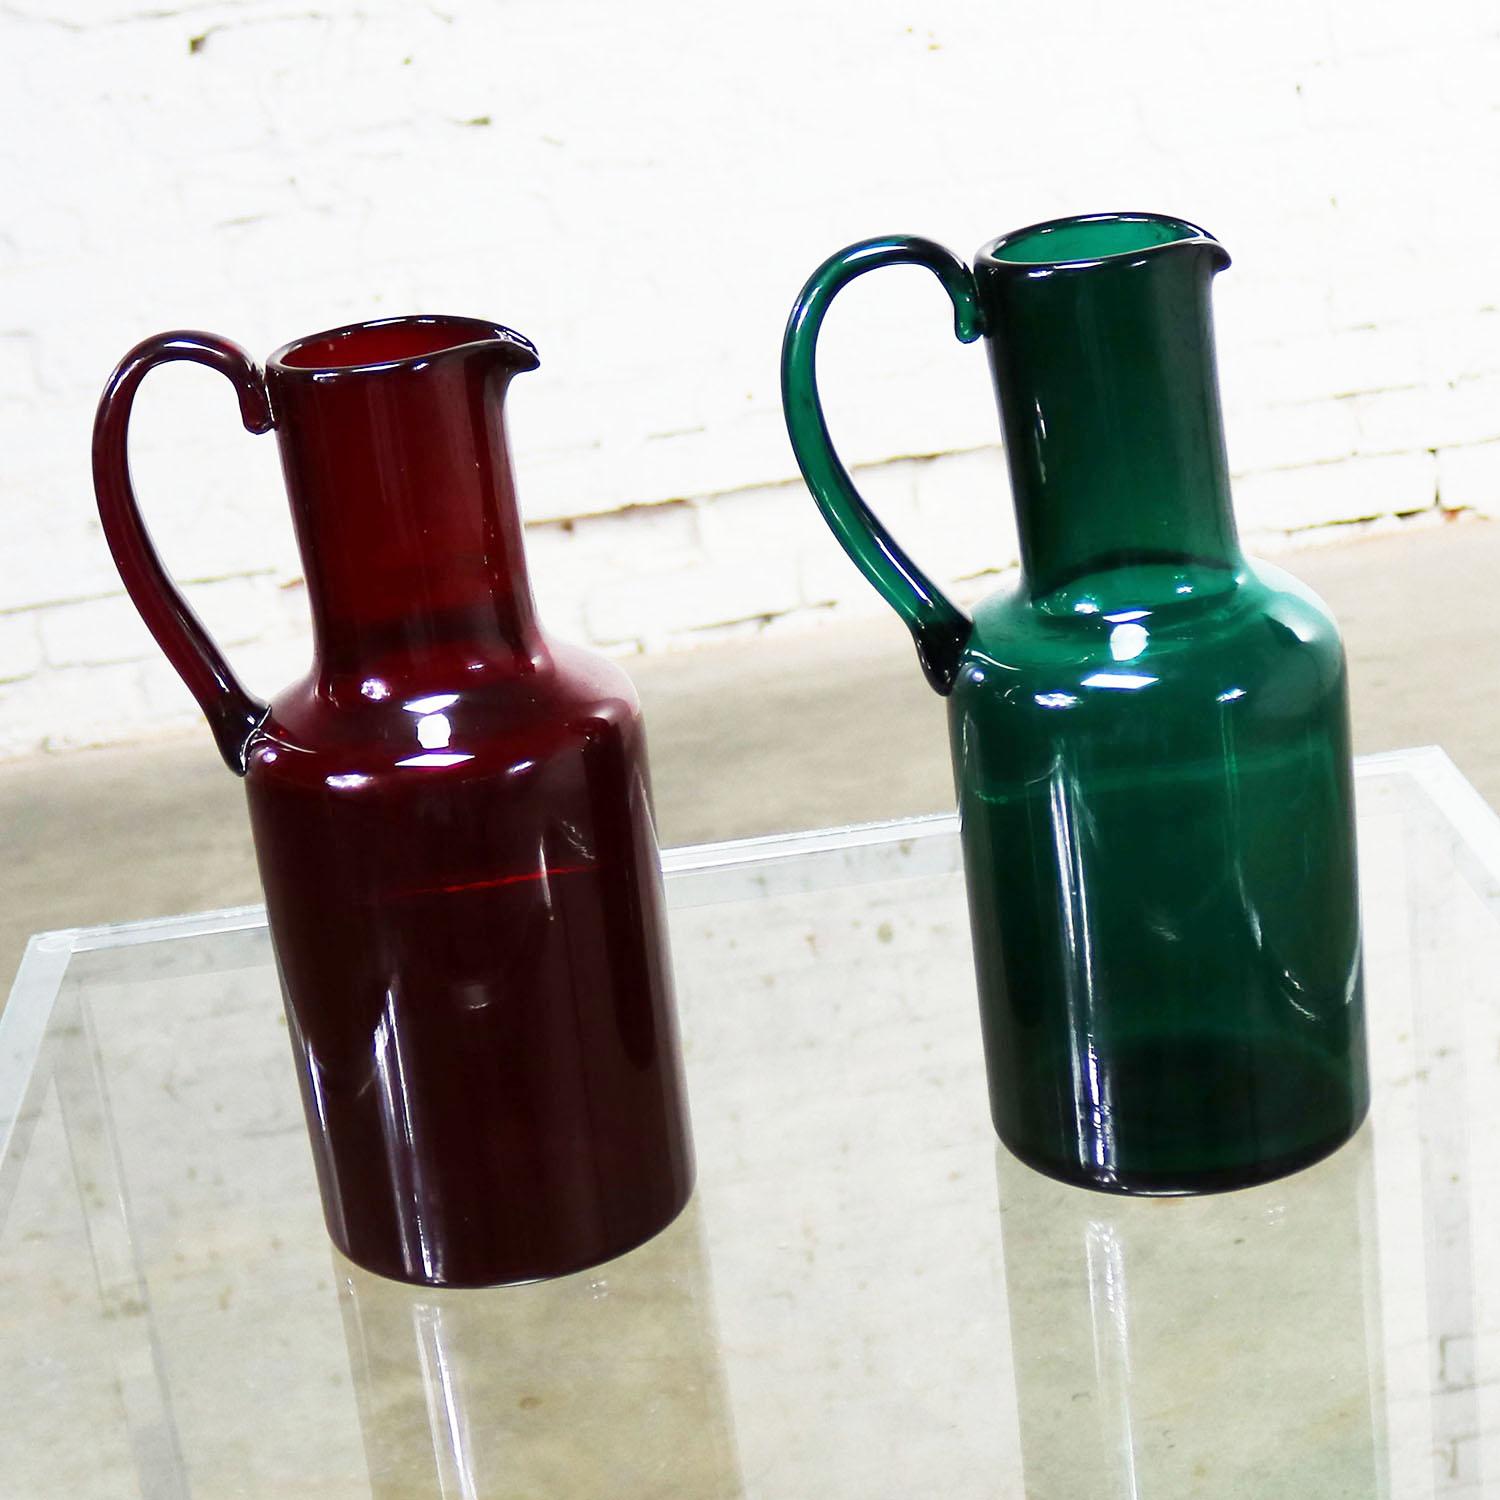 Handsome Murano cocktail pitchers or carafes by Venini. One cranberry red with paper label and acid etched signature and one emerald green with acid etched signature. We are pricing these separately, so you can purchase one or two. They are both in